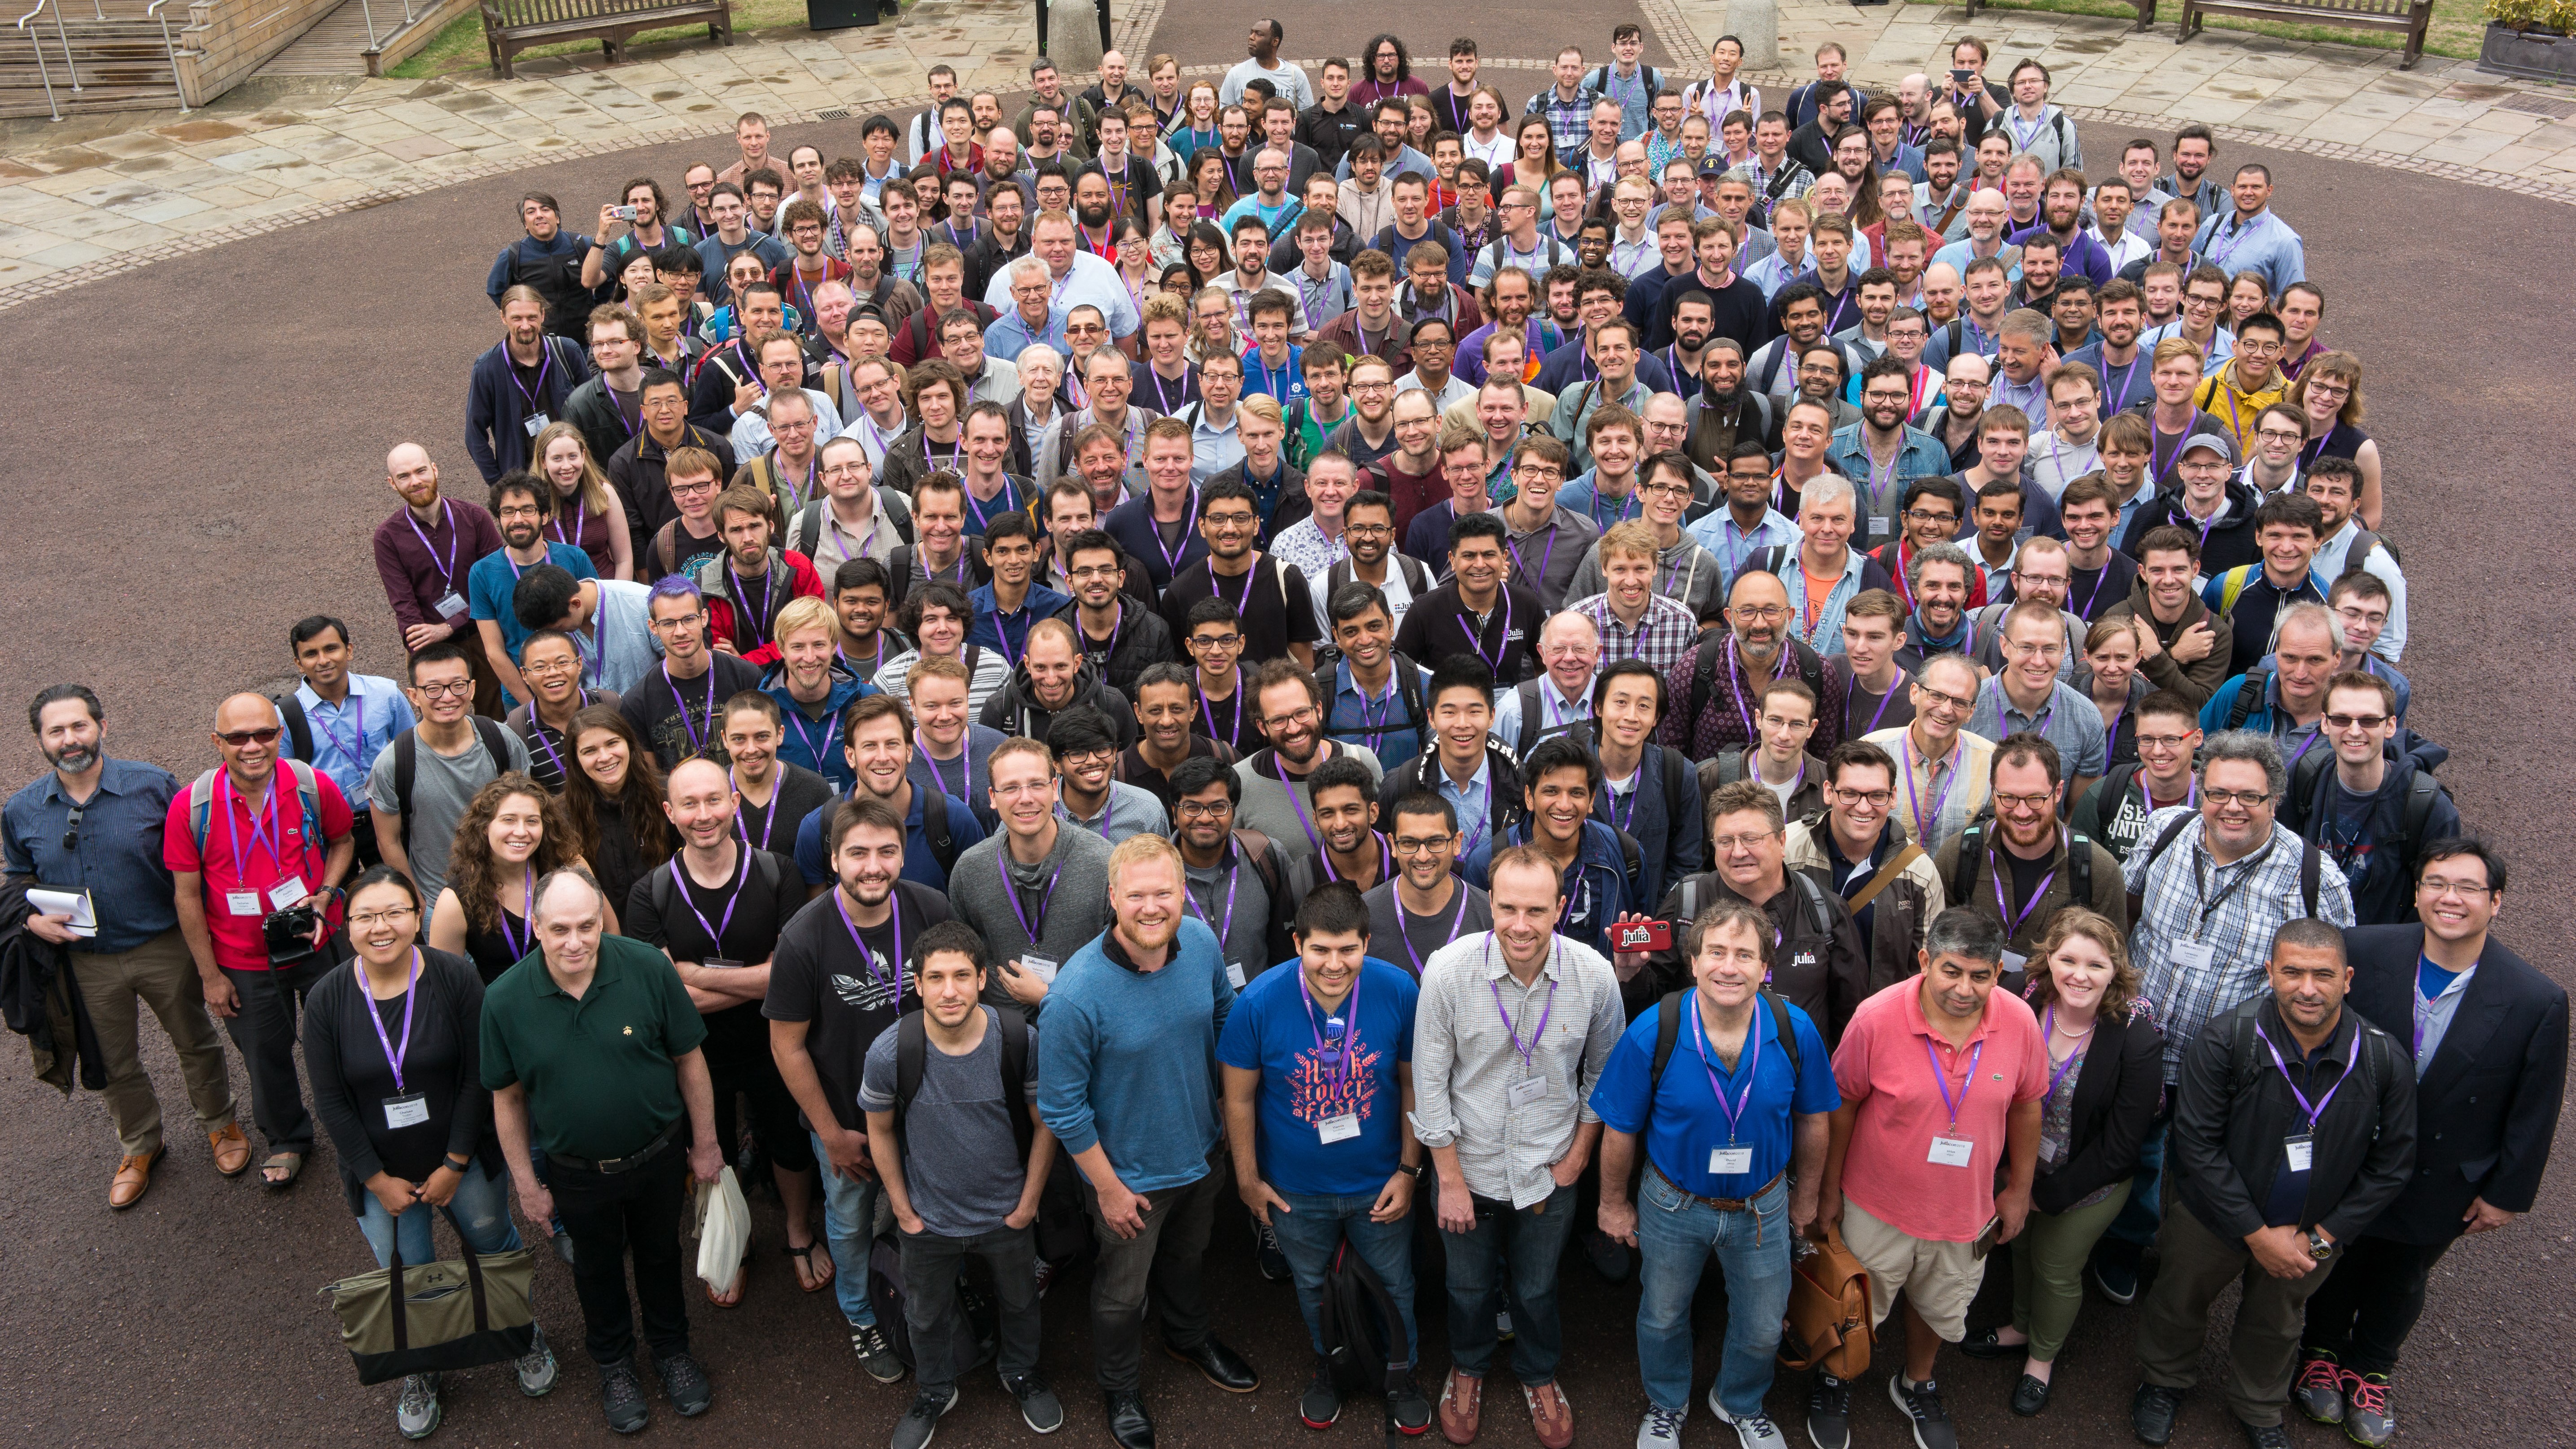 juliacon 2018 group photo in London